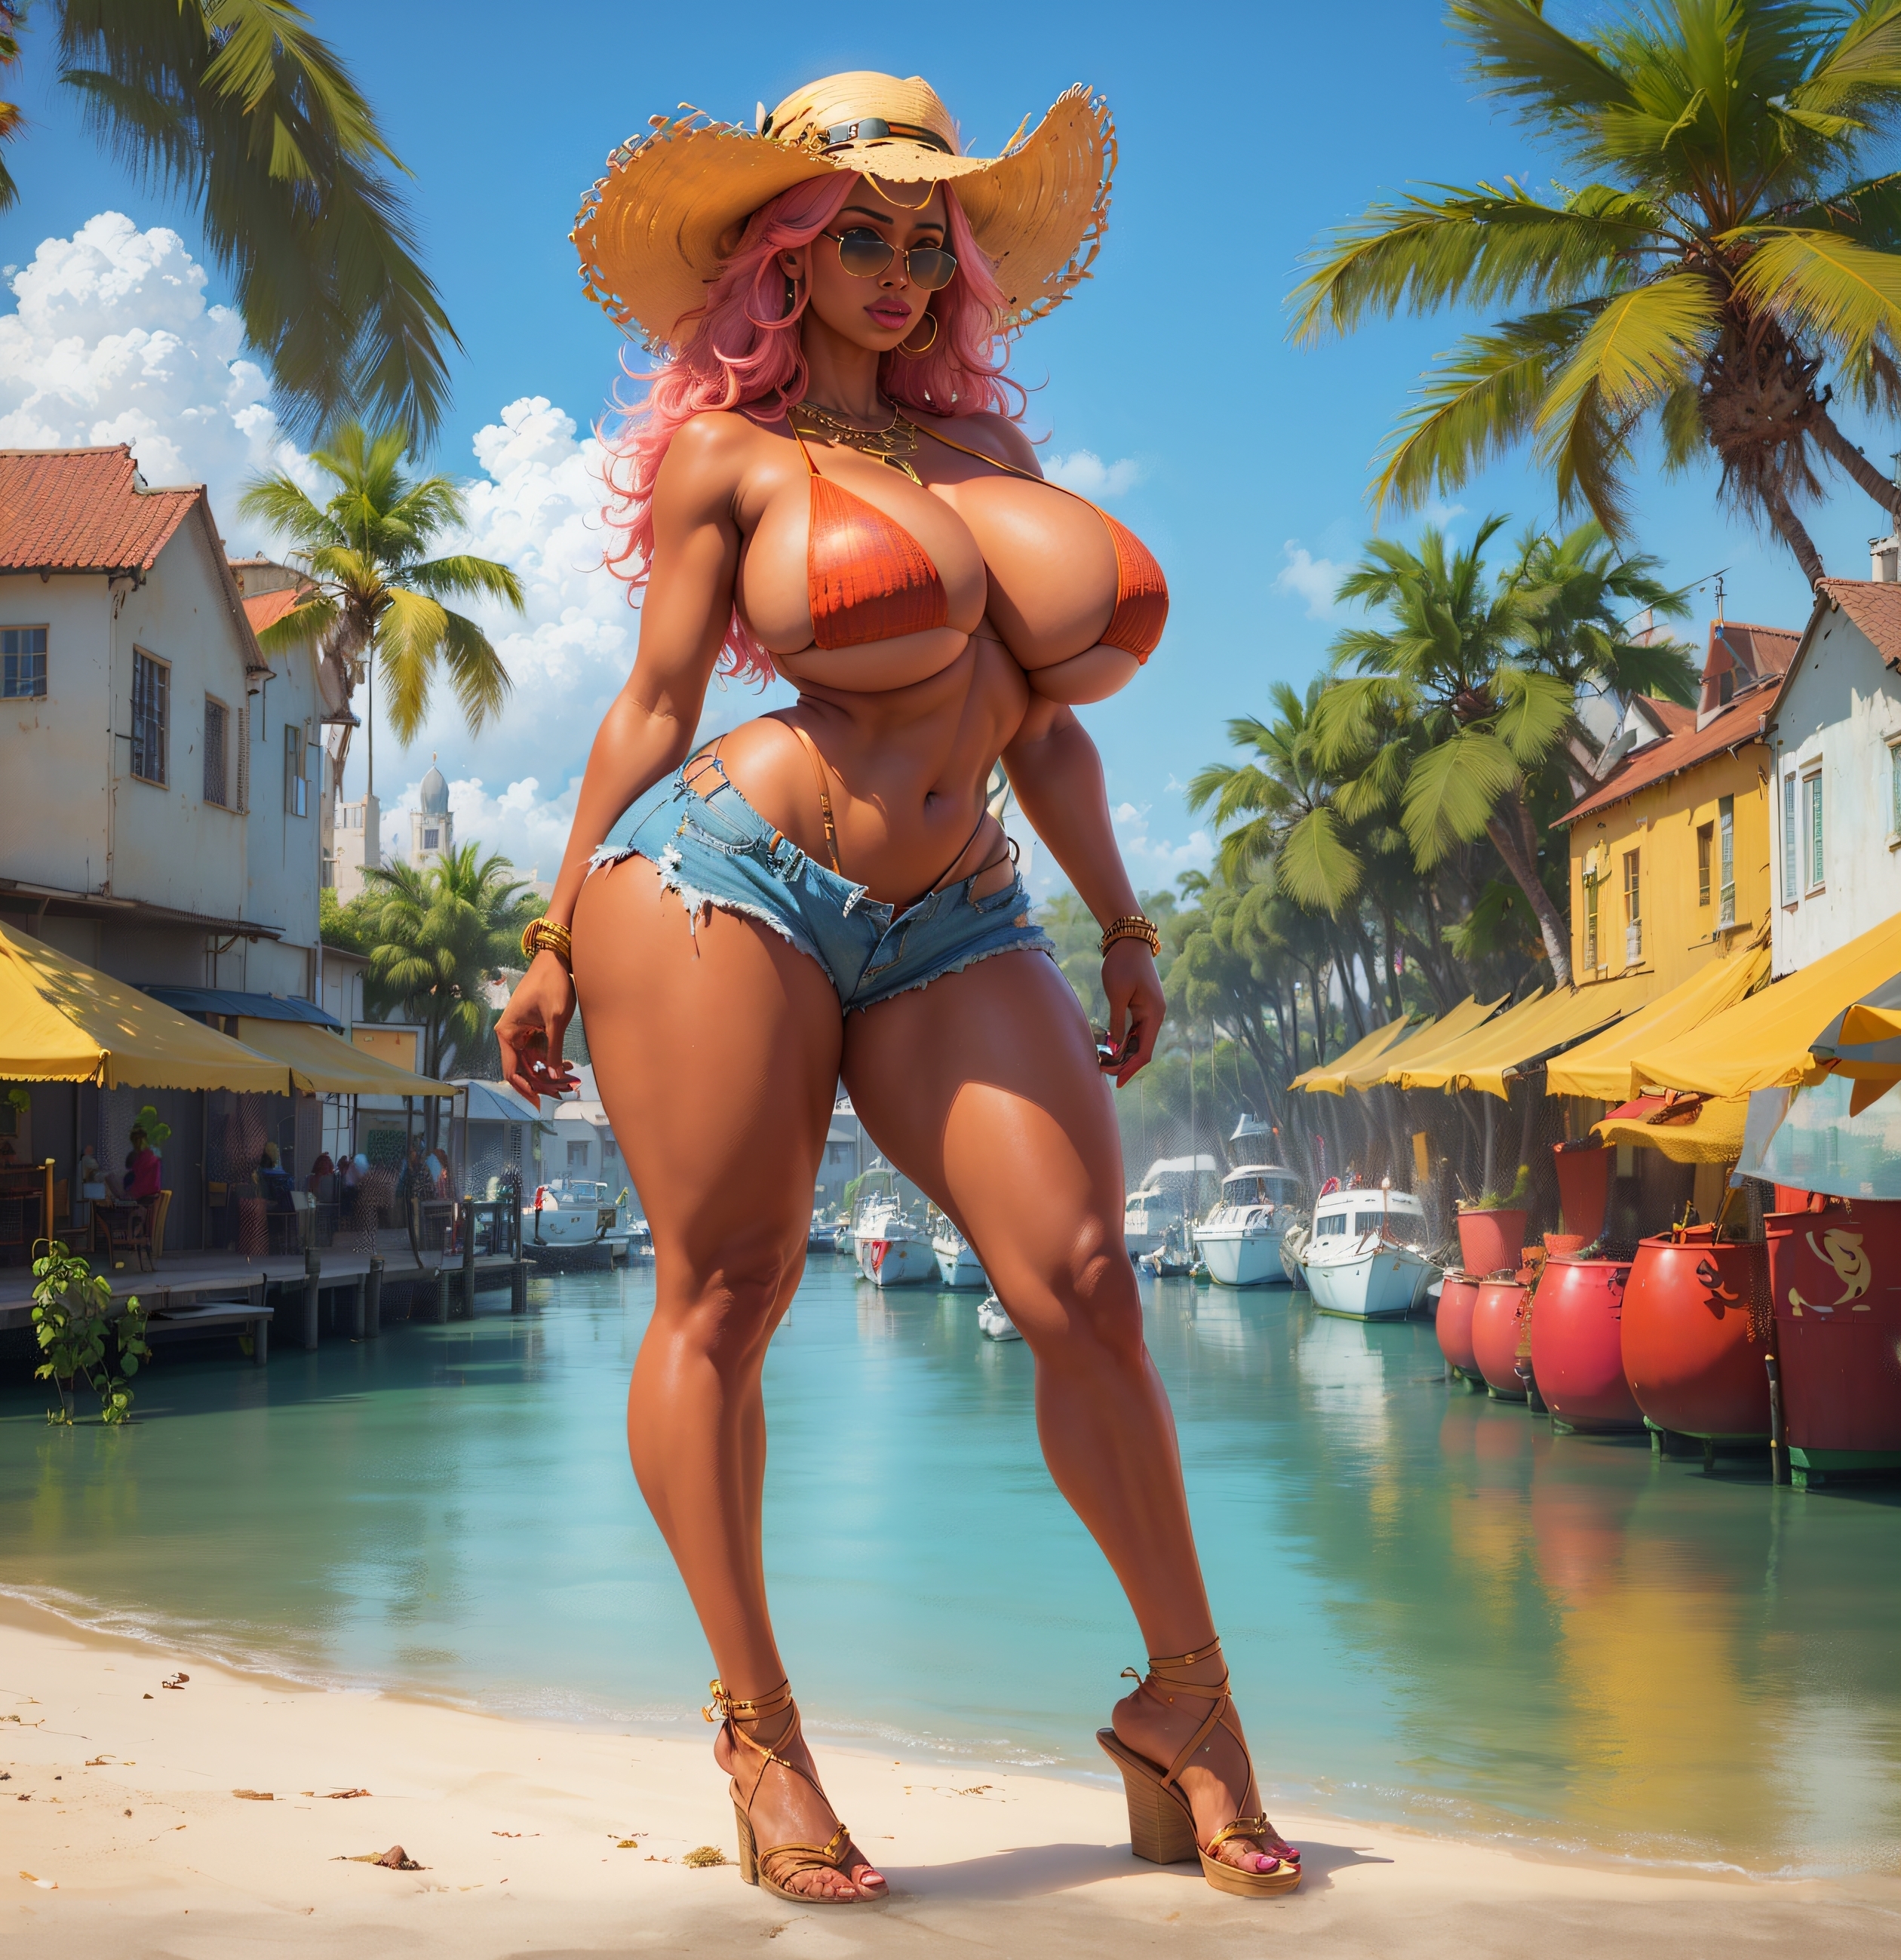 Valentina  Puerto Rico Bimbo ☀️  Muscular Girl 3d Porn 3d Girl 3dnsfw 3dxgirls Abs Sexy Hot Bimbo Huge Boobs Huge Tits Muscles Musclegirl Pinup Perfect Body Fuck Hard Sexyhot Sexy Ass Sexy Woman Fake Tits Lips Latex Flexible Smirking Big Tits Huge Ass Big Booty Booty Fit Fitness Thicc Mom Milf Mature Mature Woman Spread Legs Spread Thick Thighs Horny Face Short Hair Hardcore Curvy Big Ass Big boobs Big Breasts Big Butt Brown Eyes Cleavage Fishnet Stockings Fishnet Nipple Piercing Piercing Belly Button Piercing Leather Jacket Thighs Jewels Pawg Ass Red head Tribal Weapon Armor Nude Boobs Pregnant Big Balls Big Nipples Lingerie Sexy Lingerie Womb Tattoo Face Tattoo Slut Whore Bitch Comic Hotpants Shorts Long Hair Smile Blonde Graffiti Splash Body Paint Paint Squatting Japanese Korean Asian Priestess Nun Chrome Body Writings Slave Submissive Domination Cum Facial Cumshot Cum Inside Cum Covered Cum In Mouth Tongue Out Tongue Long Tongue Grabbing Arms Grab Grab Boobs Prostitute Hooker Toilet Futanari Futa Musclewoman Thai